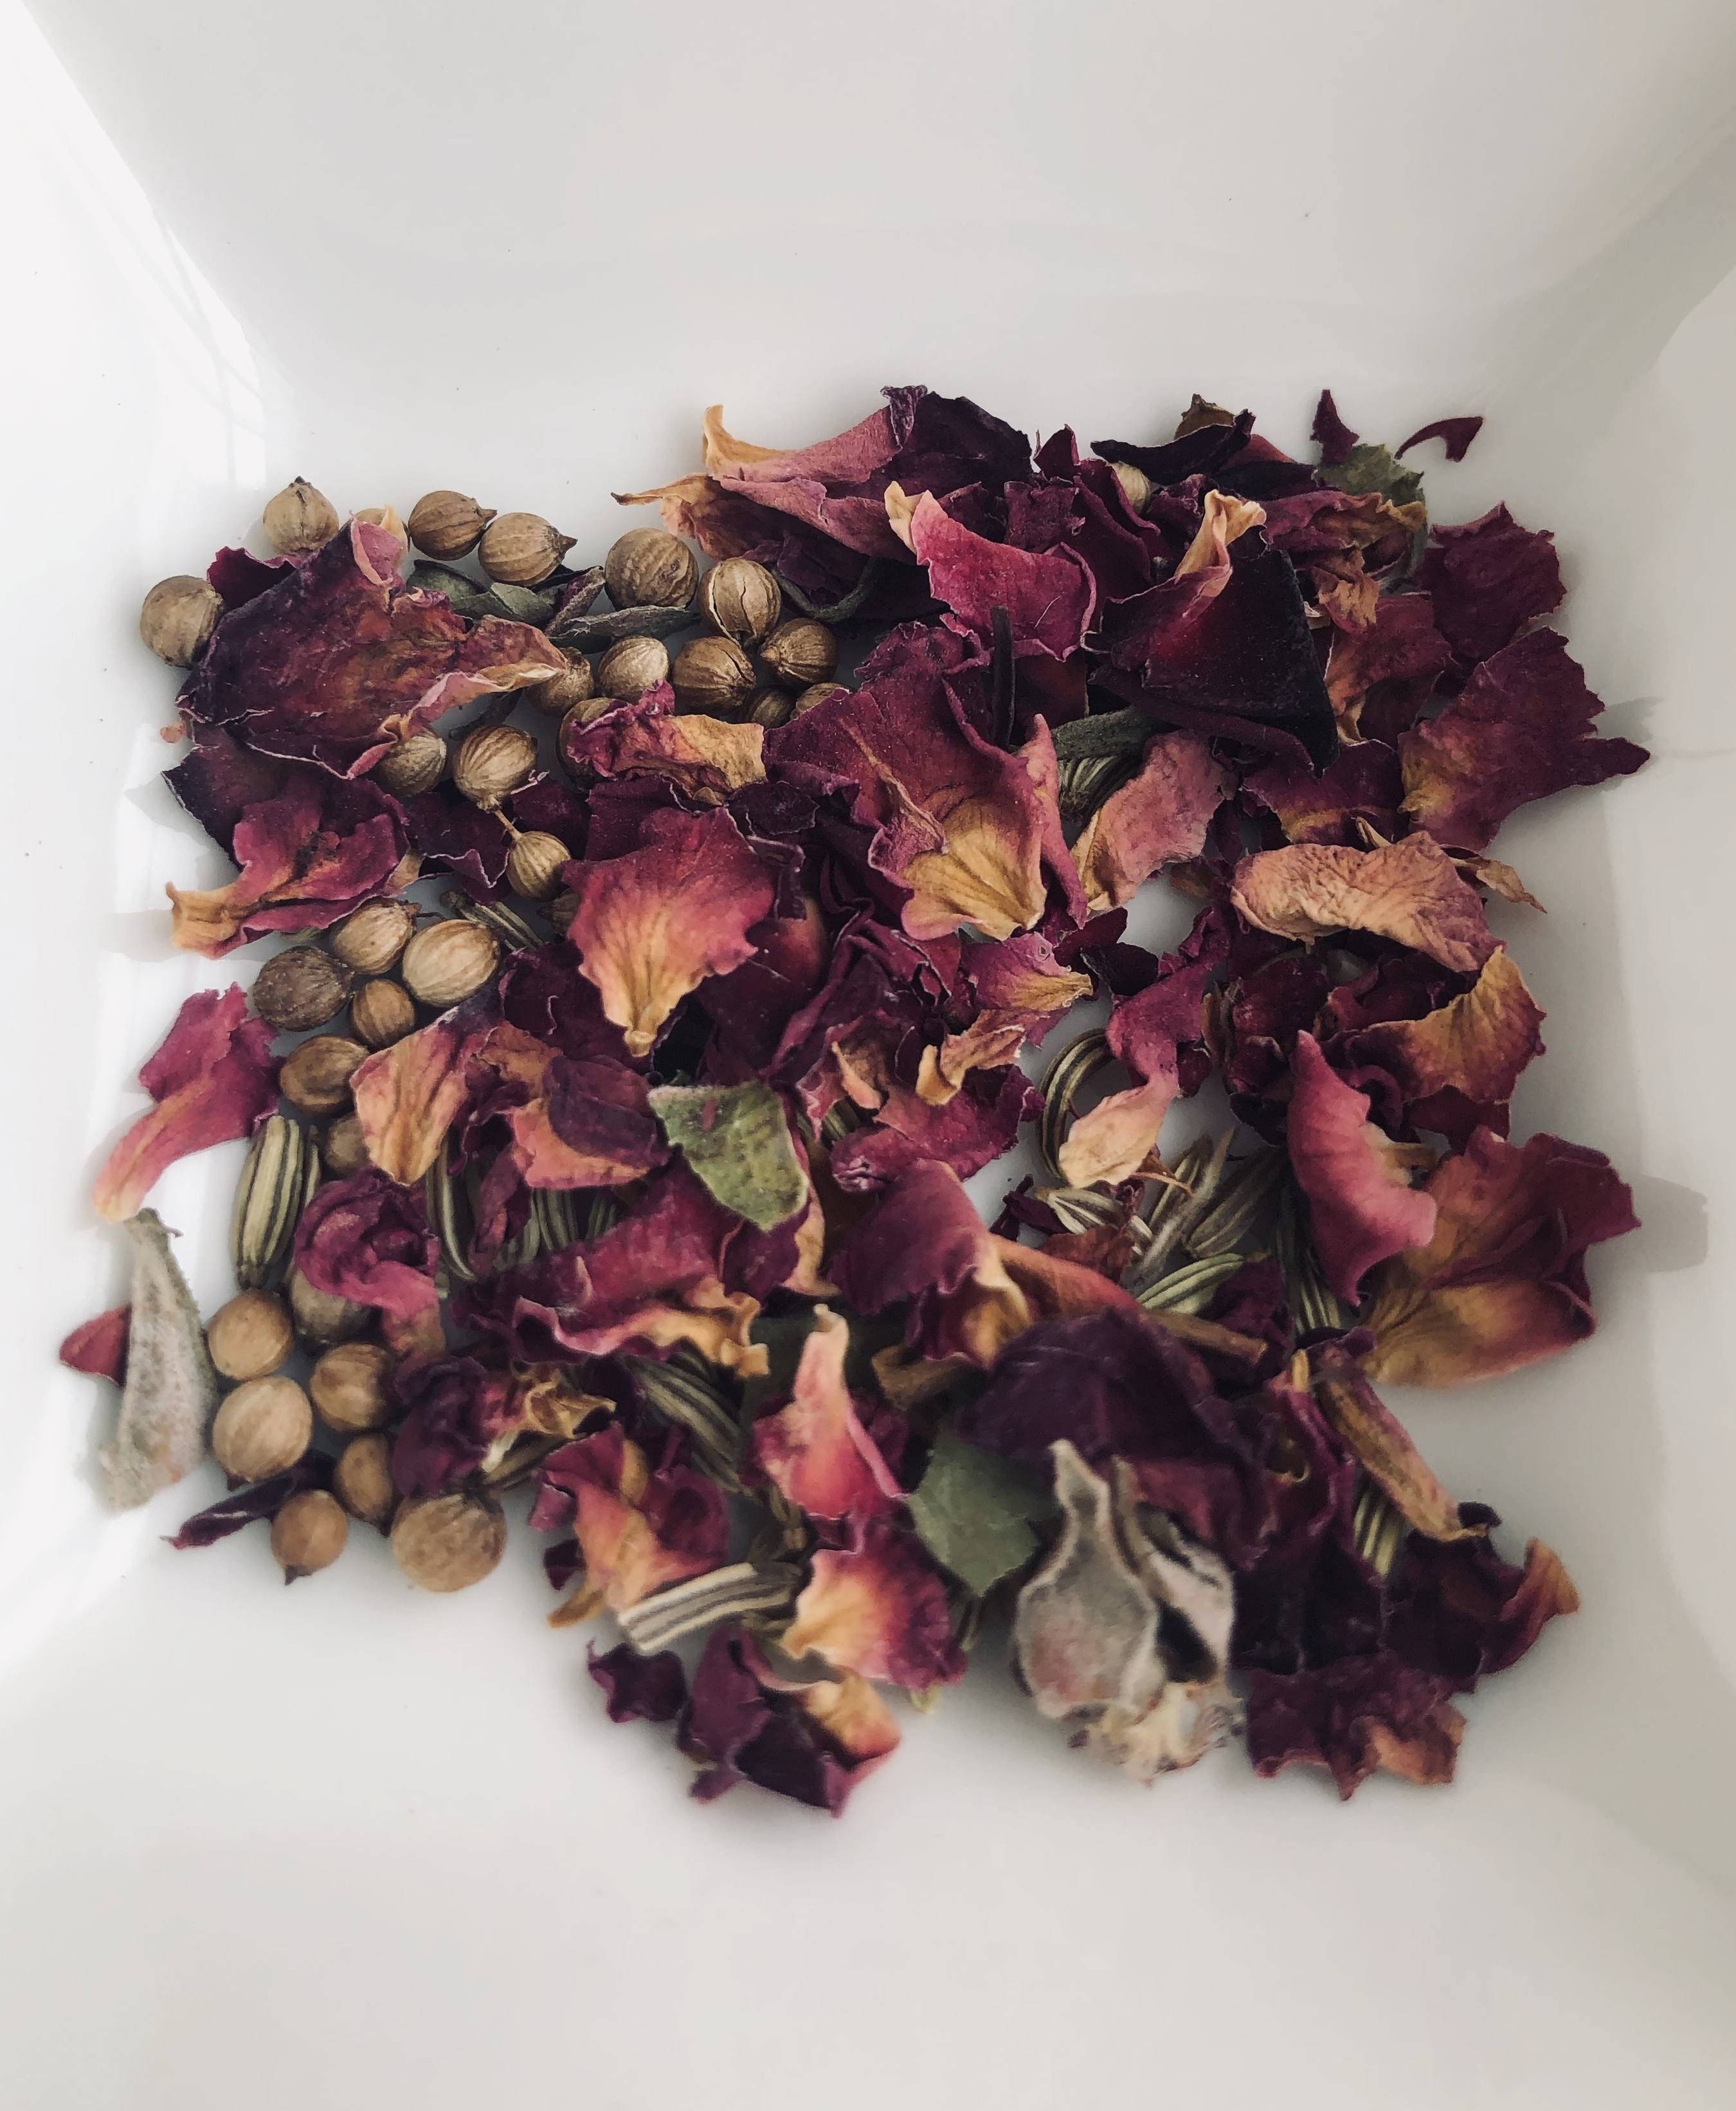 Dried rose petals in a bowl